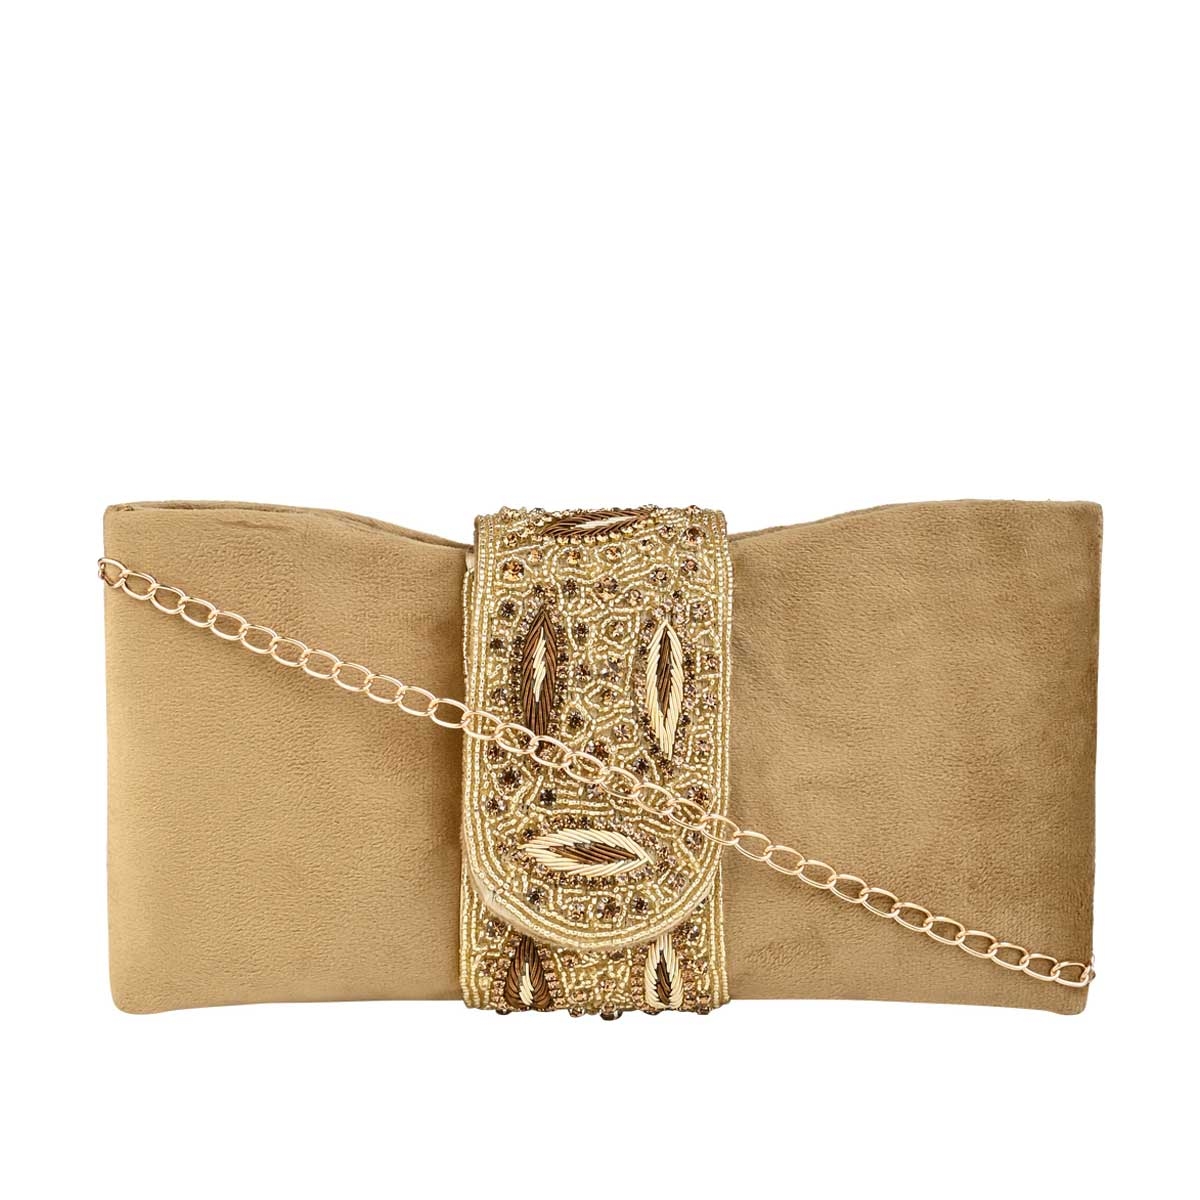 Rocia | ROCIA BY REGAL BEIGE WOMEN SUEDE CLUTCH WITH HAND EMBROIDERY